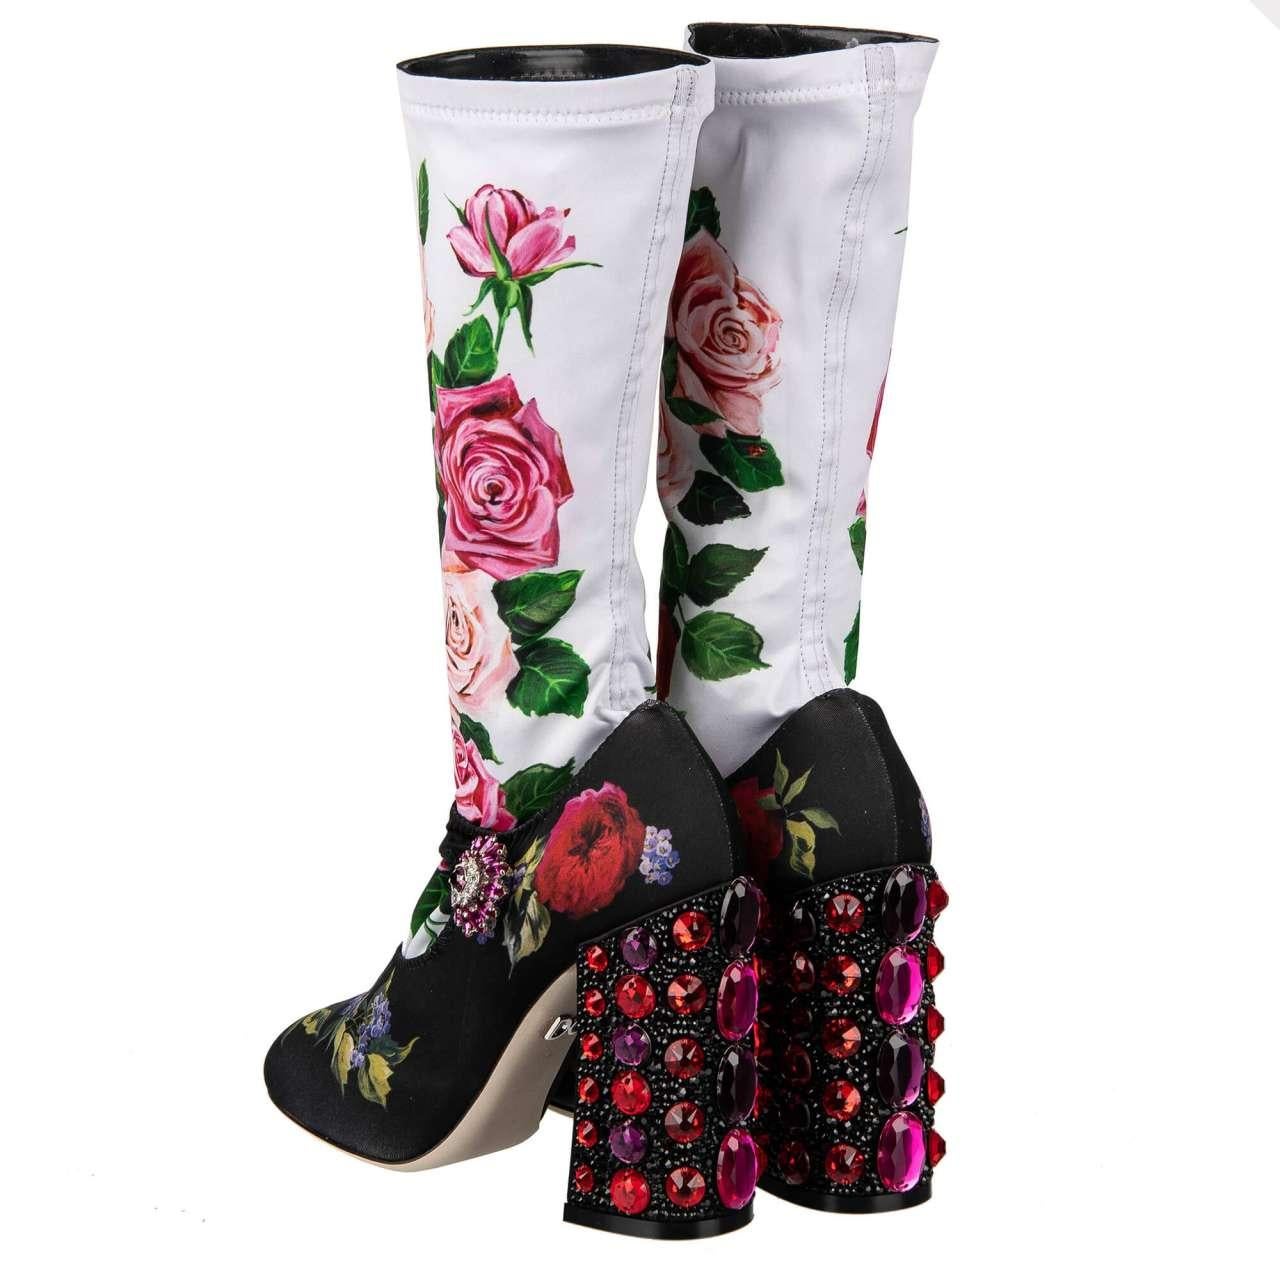 D&G Roses Printed Elastic Socks Pumps VALLY with Crystals Heel Black White 40 In Excellent Condition For Sale In Erkrath, DE